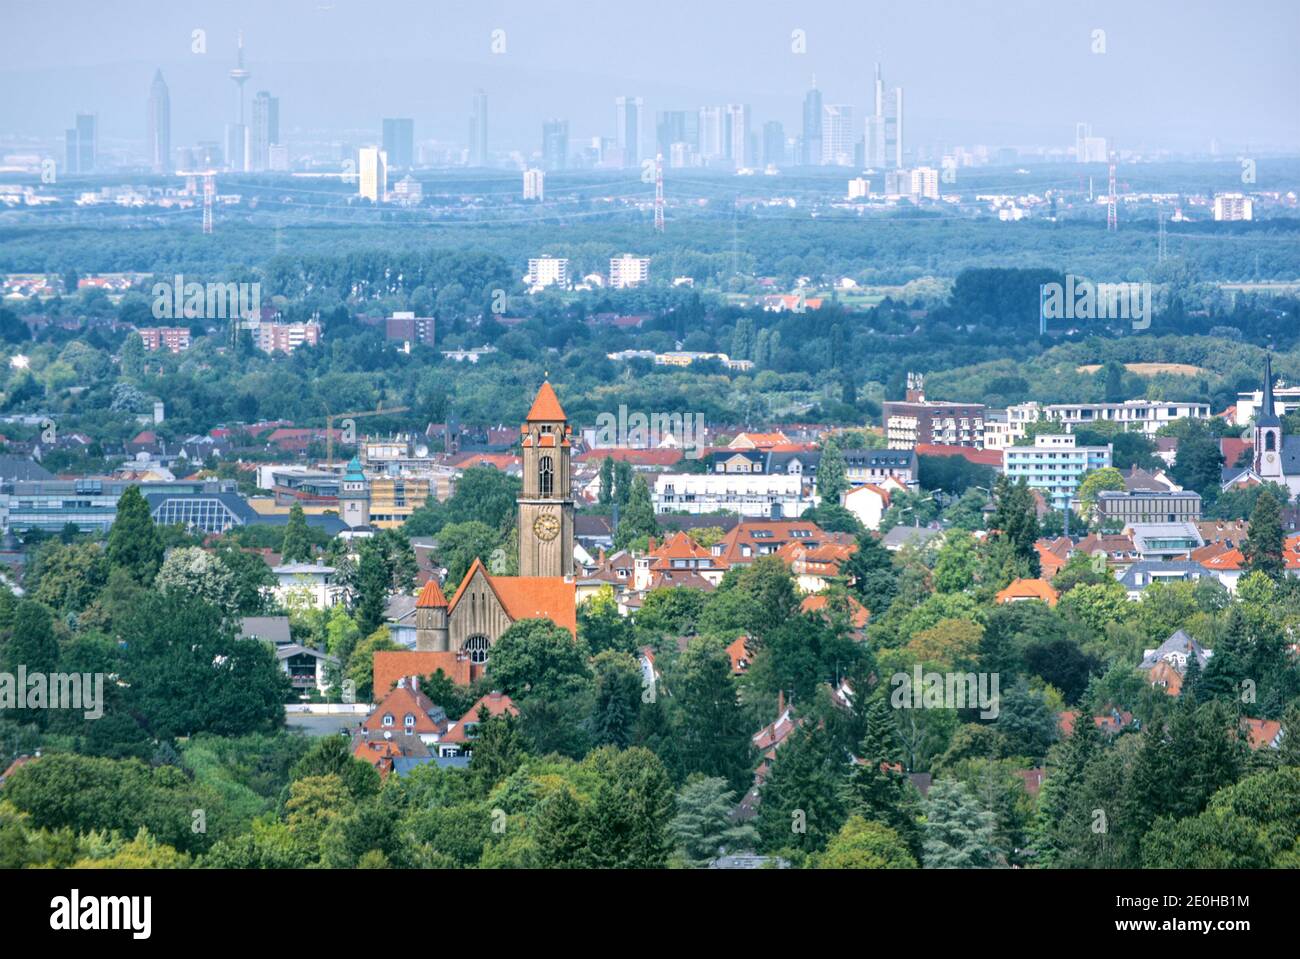 Cityscape of Darmstadt (Germany) and the skyline of Frankfurt am Main in the background Stock Photo